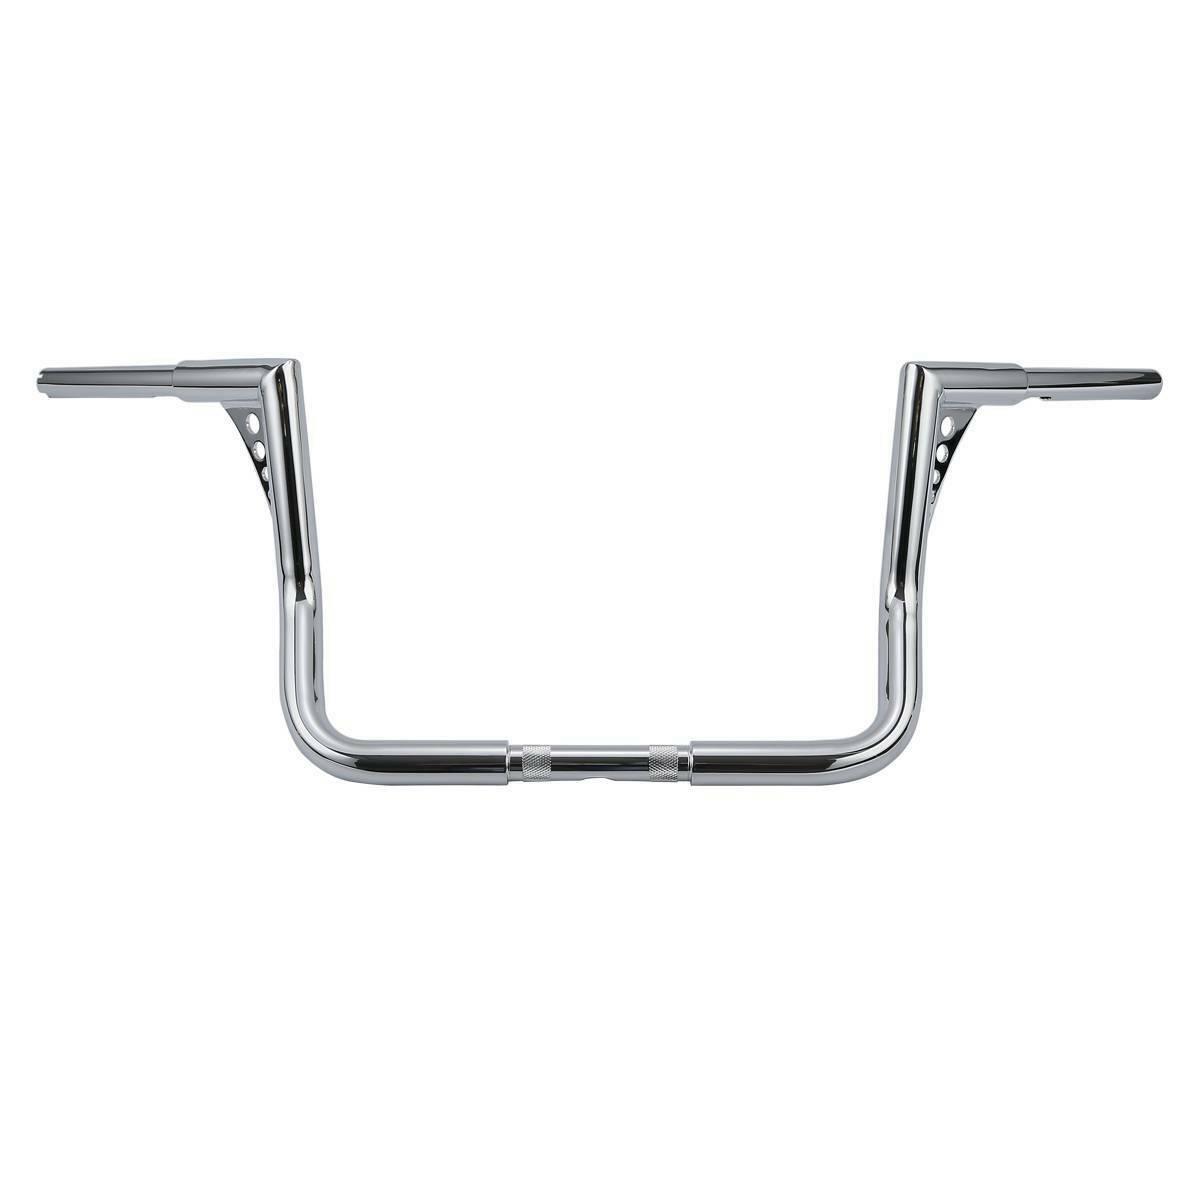 12" Rise Ape Hanger 1-1/4" Handlebar Fit For Harley Touring FL Dressers Baggers - Moto Life Products